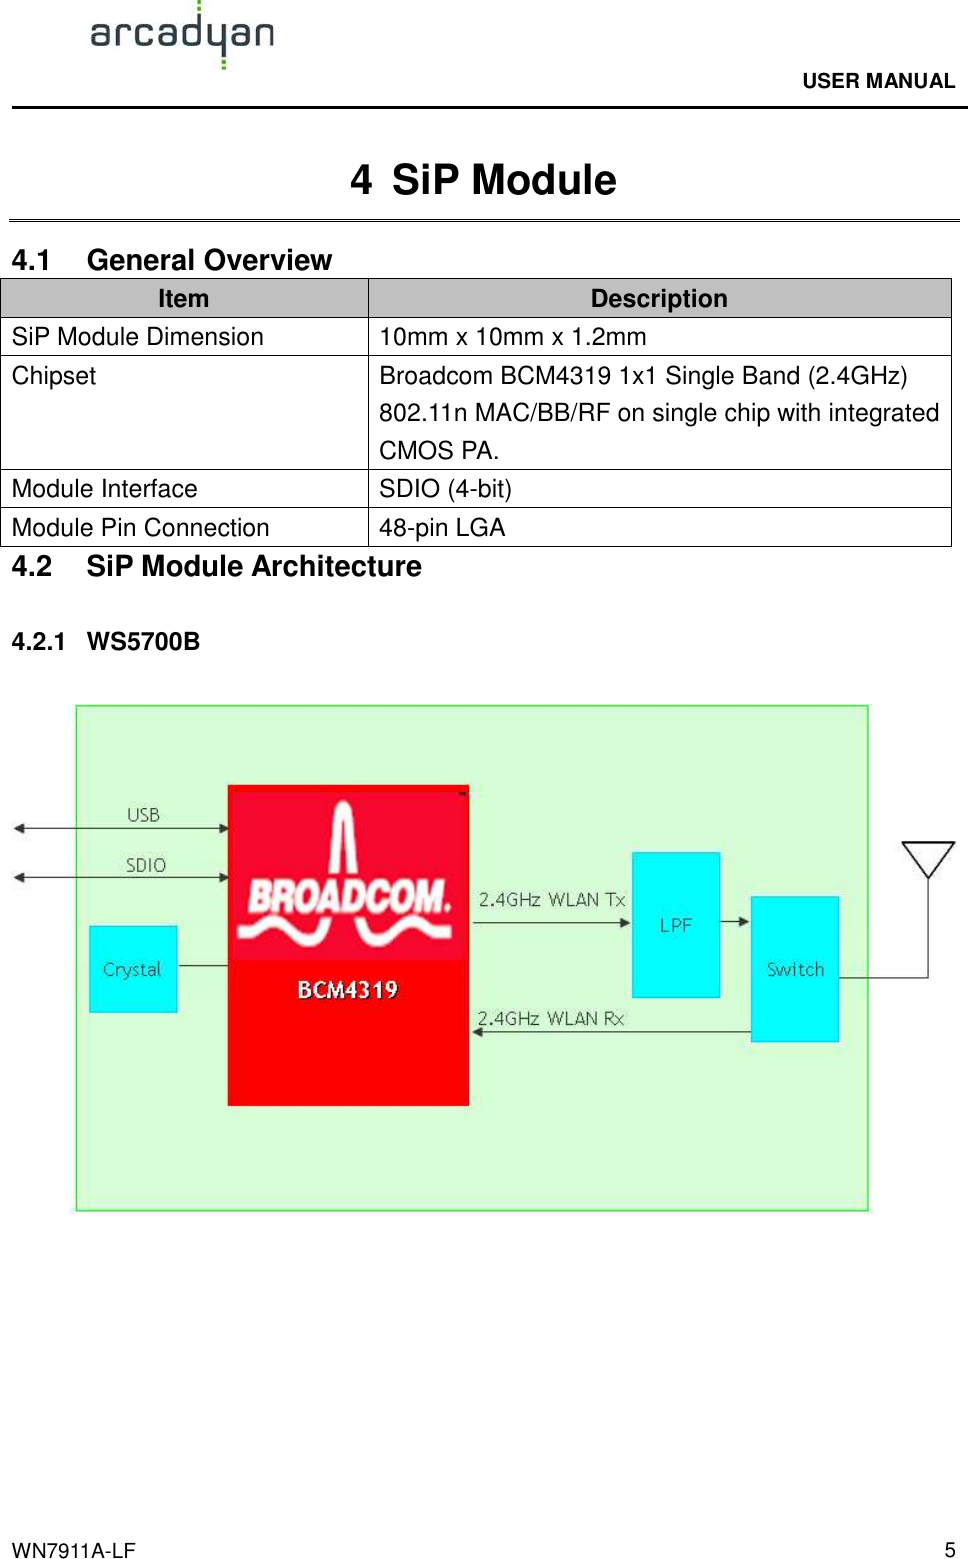                                              USER MANUAL                                              WN7911A-LF  5 4  SiP Module 4.1  General Overview Item  Description SiP Module Dimension  10mm x 10mm x 1.2mm Chipset  Broadcom BCM4319 1x1 Single Band (2.4GHz) 802.11n MAC/BB/RF on single chip with integrated CMOS PA. Module Interface  SDIO (4-bit) Module Pin Connection  48-pin LGA   4.2  SiP Module Architecture  4.2.1  WS5700B    